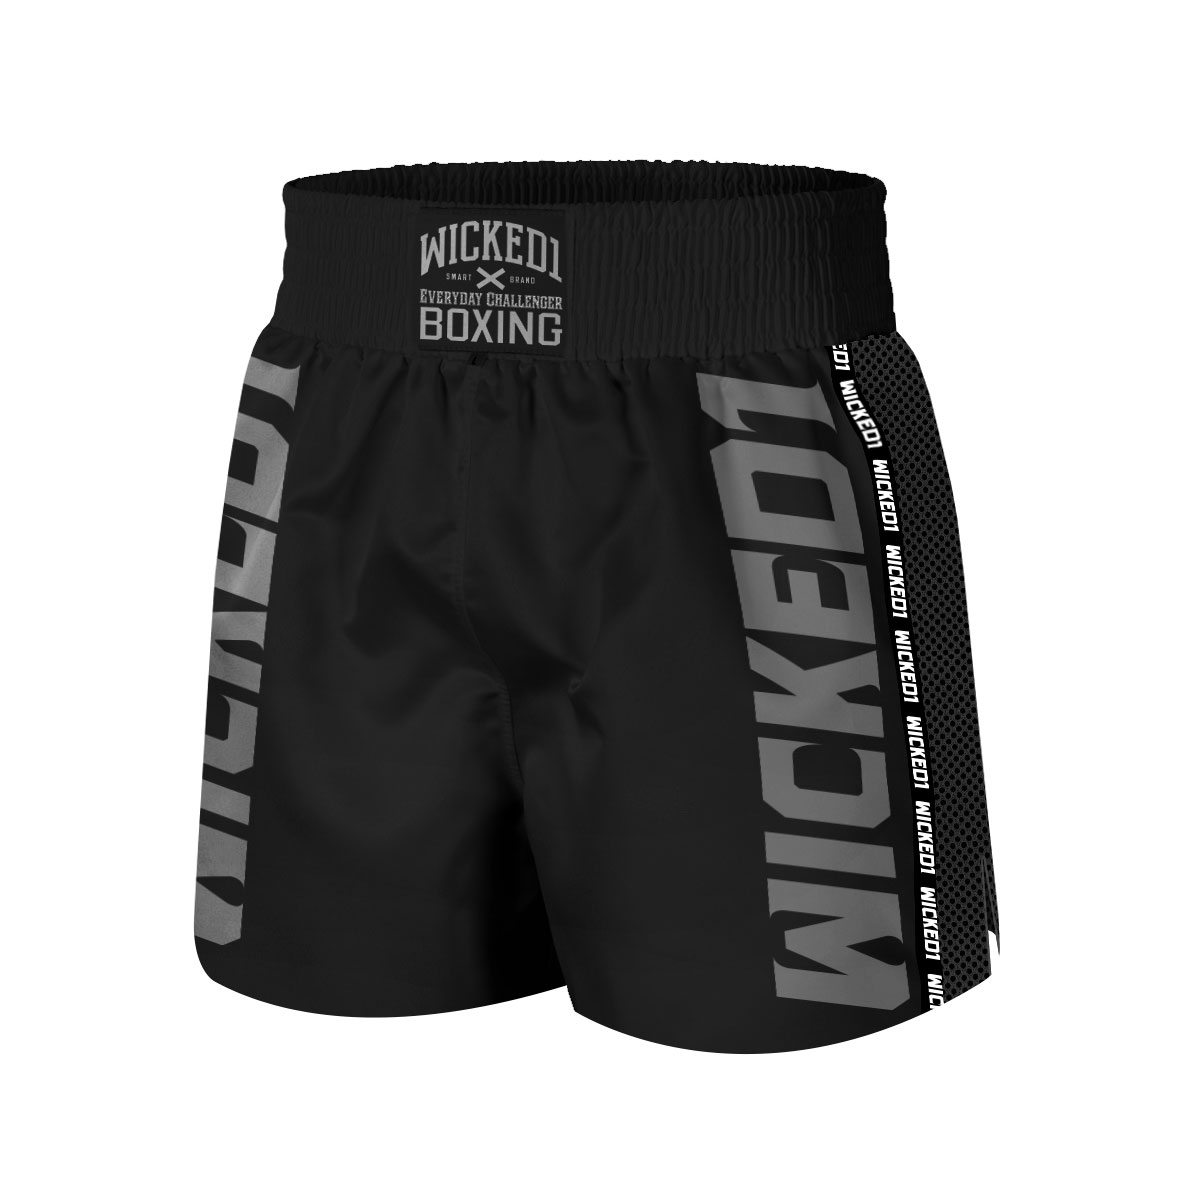 Short de boxe Anglaise Wicked one